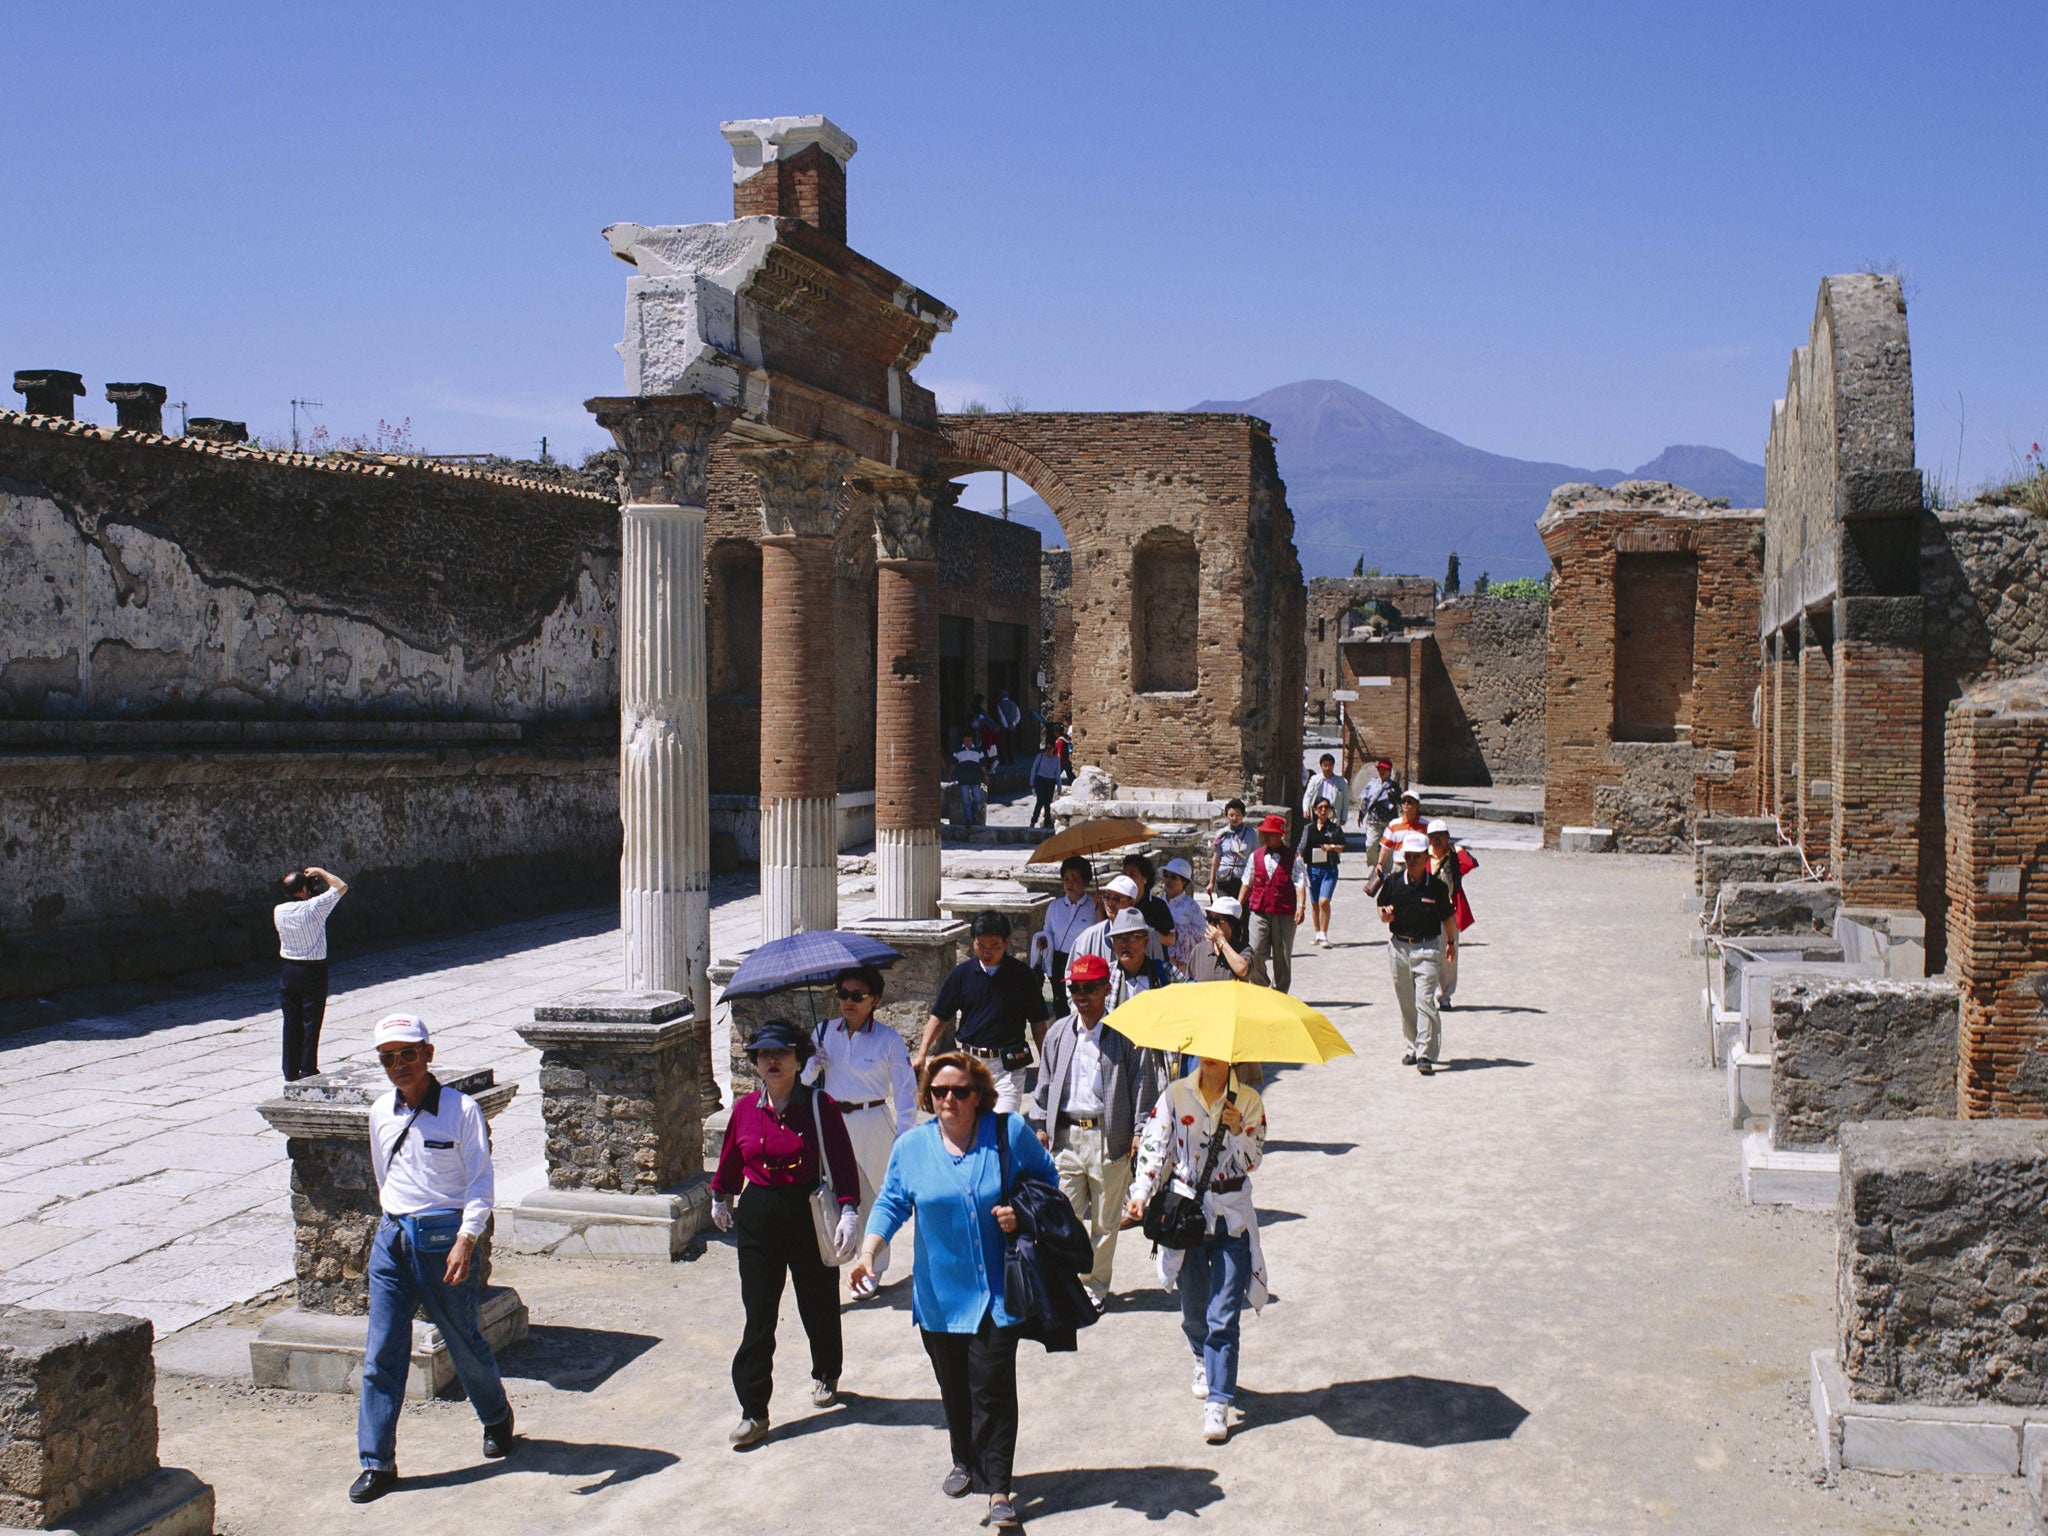 Pompeii has been trampled by millions of tourists